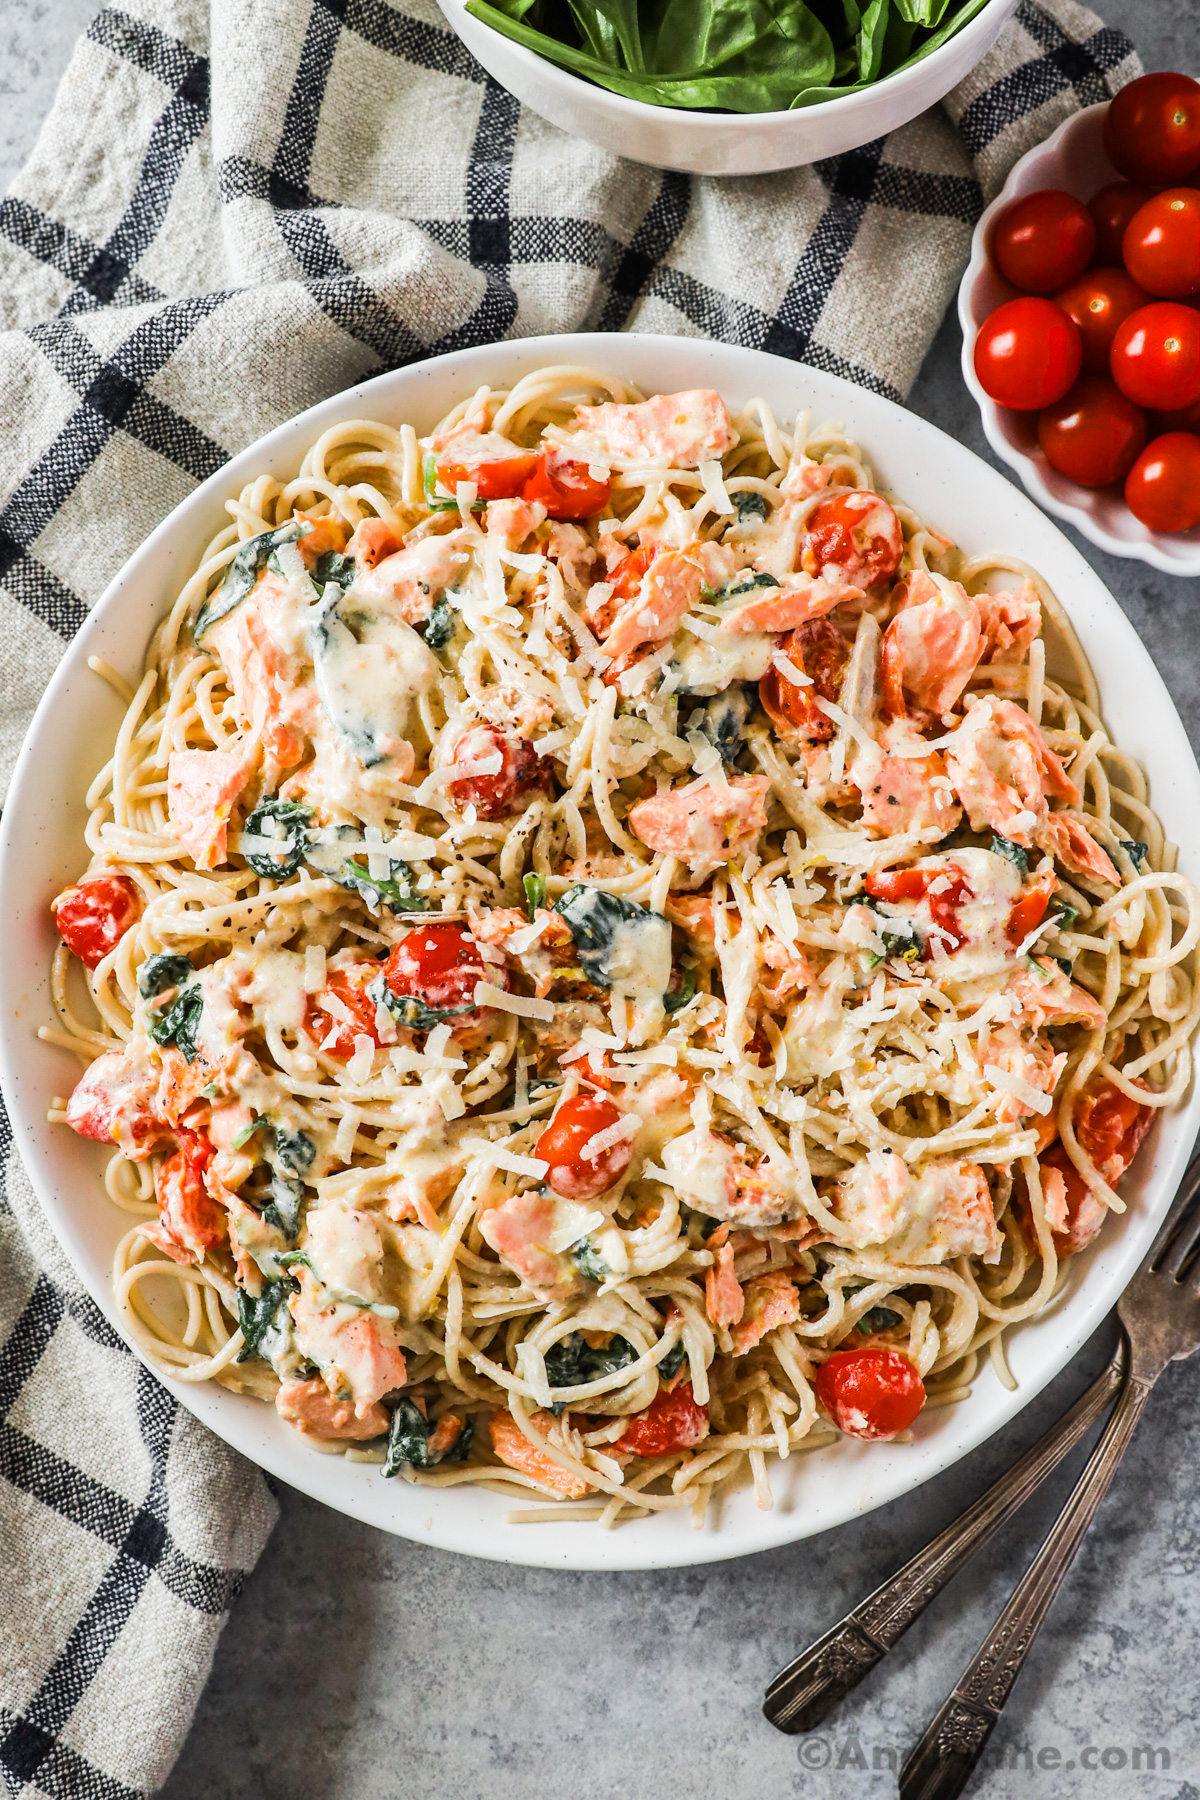 Plate of creamy pasta with flaked salmon, cherry tomatoes and spinach